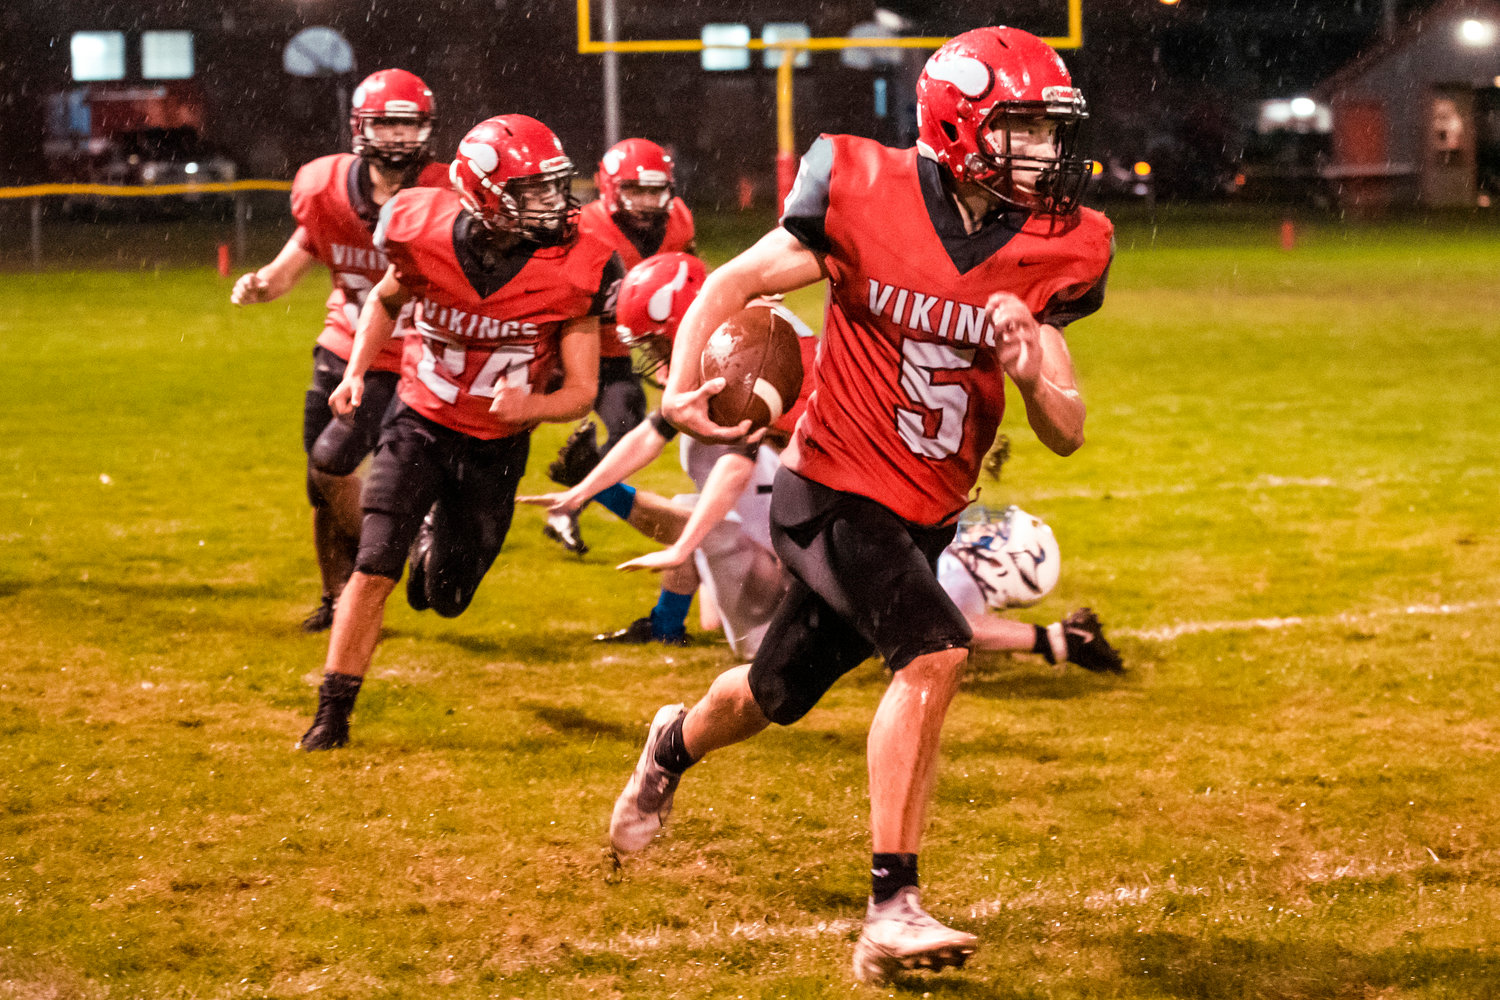 Mossyrock’s Keegan Kolb (5) runs with the football during a game against Toutle Lake Thursday night.